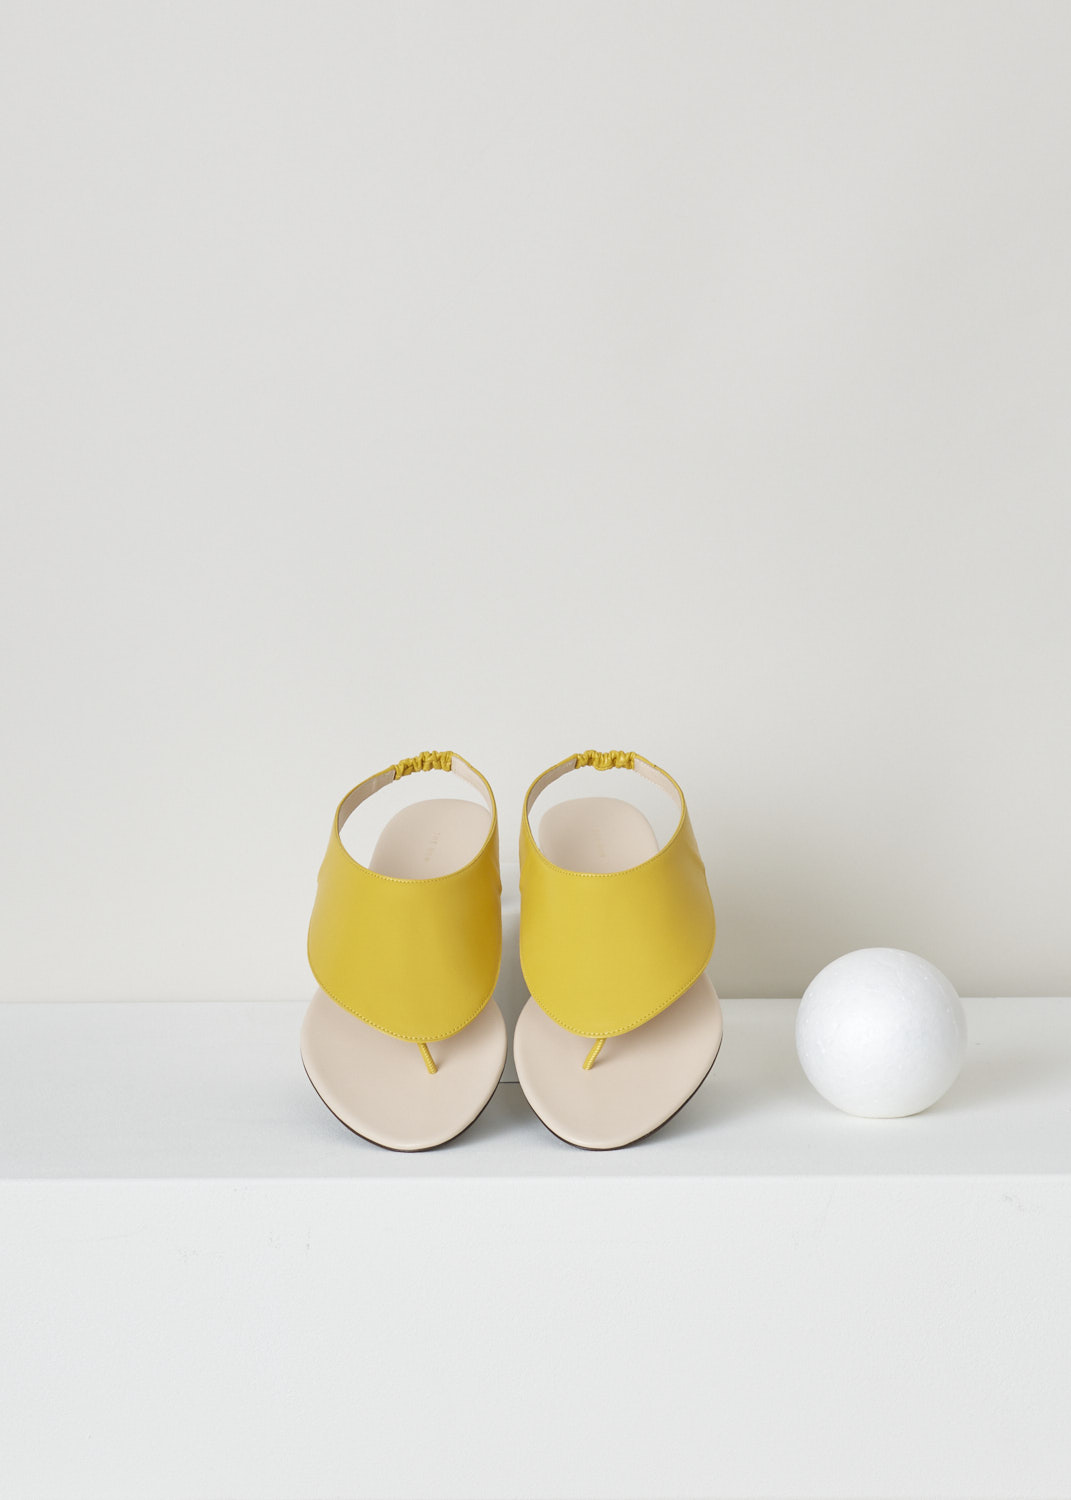 The Row, Mustard yellow ravello thong sandal, F1155_L35_MUS, yellow, top, Ravelo slip-on sandals from The Row. Coloured to the lovely shade of mustard yellow. Featuring a round and open toe vamp and comes with an elastic slingback strap. 